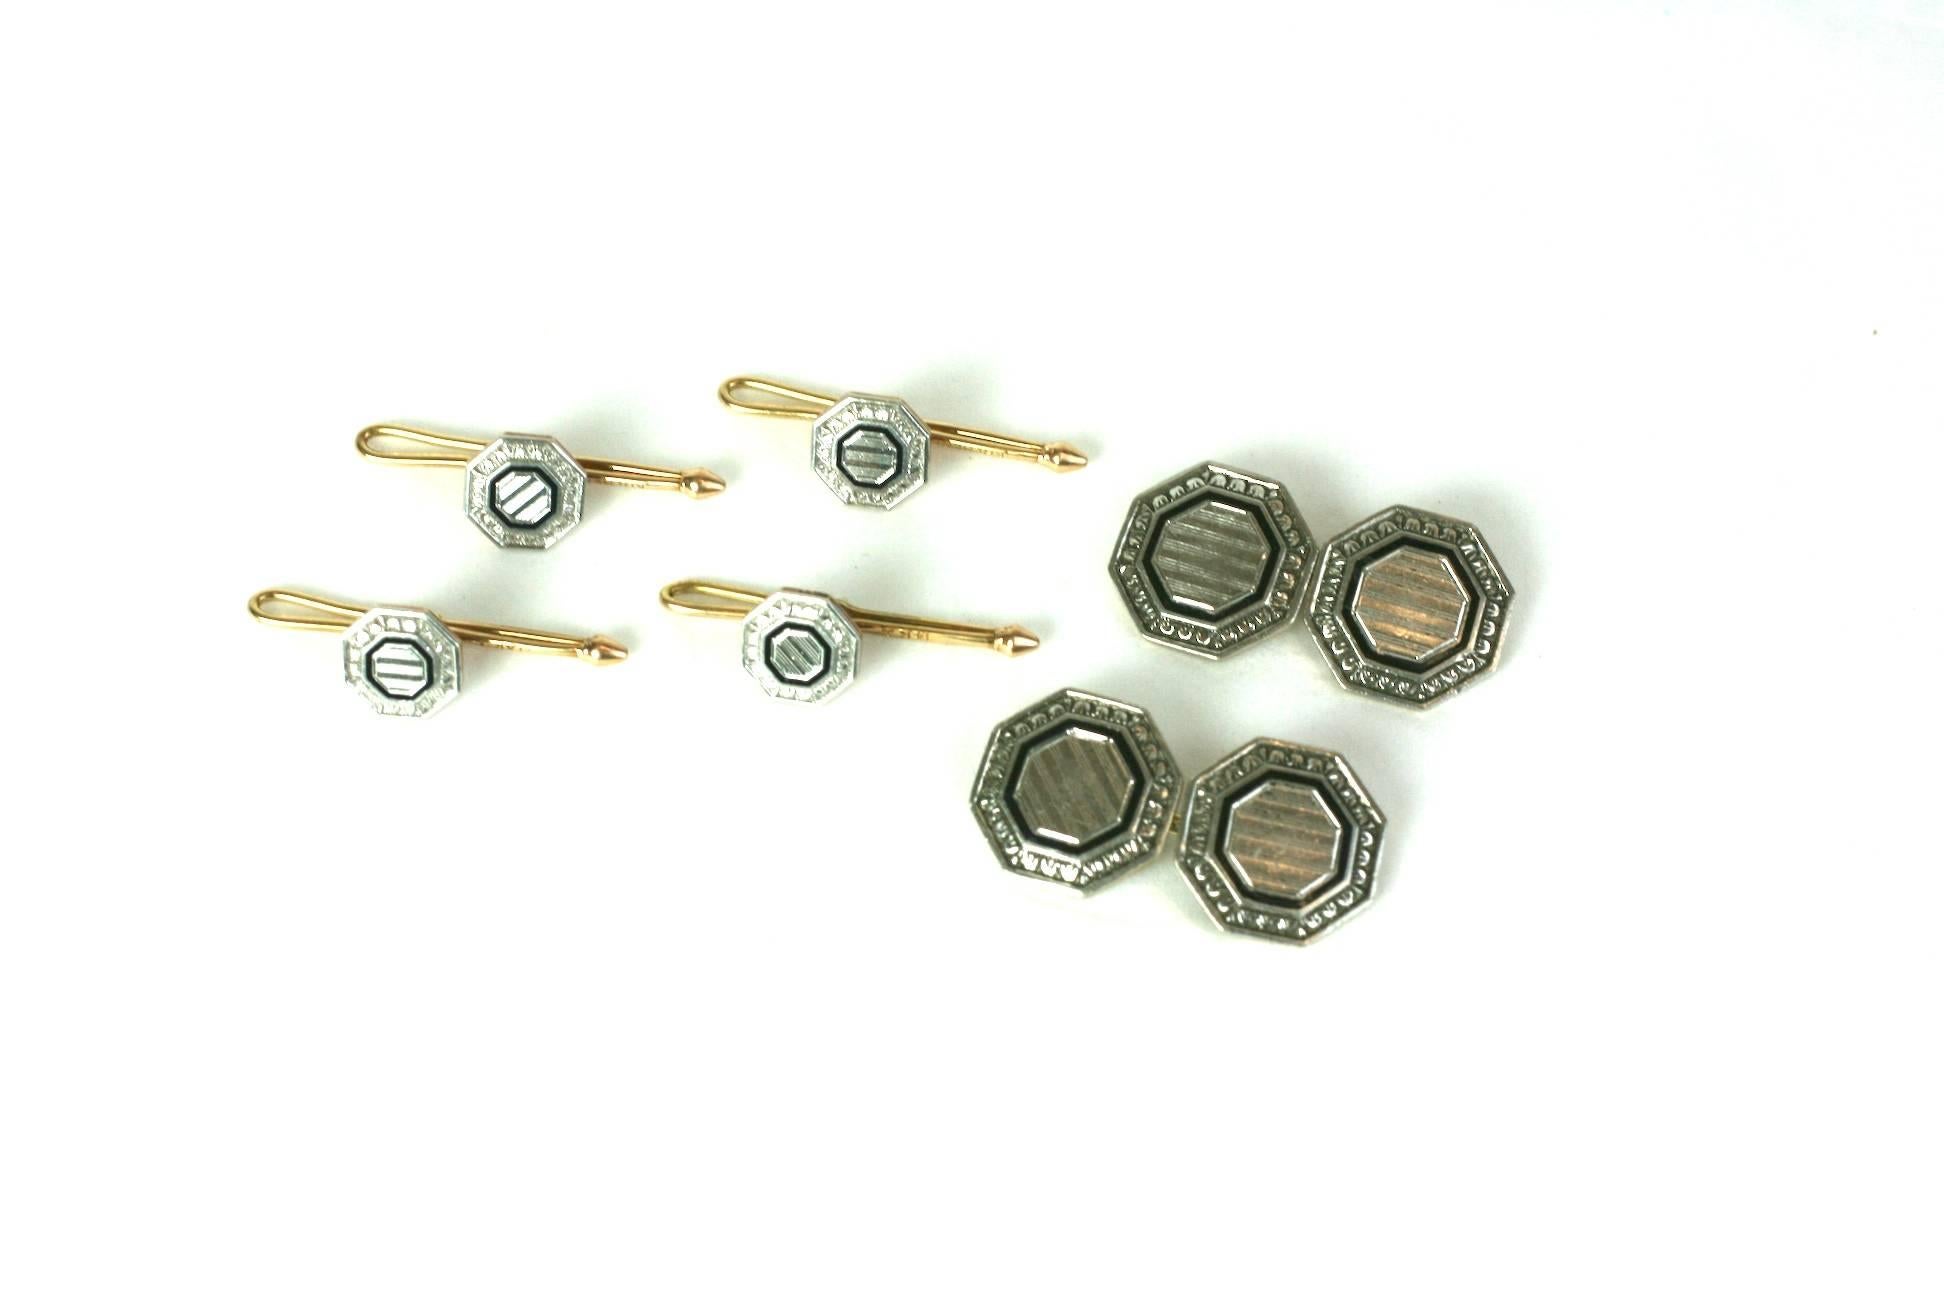 Elegant Art Deco Engraved and Enamel Stud Set from the 1930's. Set in 14k yellow gold with platinum tops and black enamel. Cuff links and 4 shirt studs included.
1930's USA. Excellent condition. 